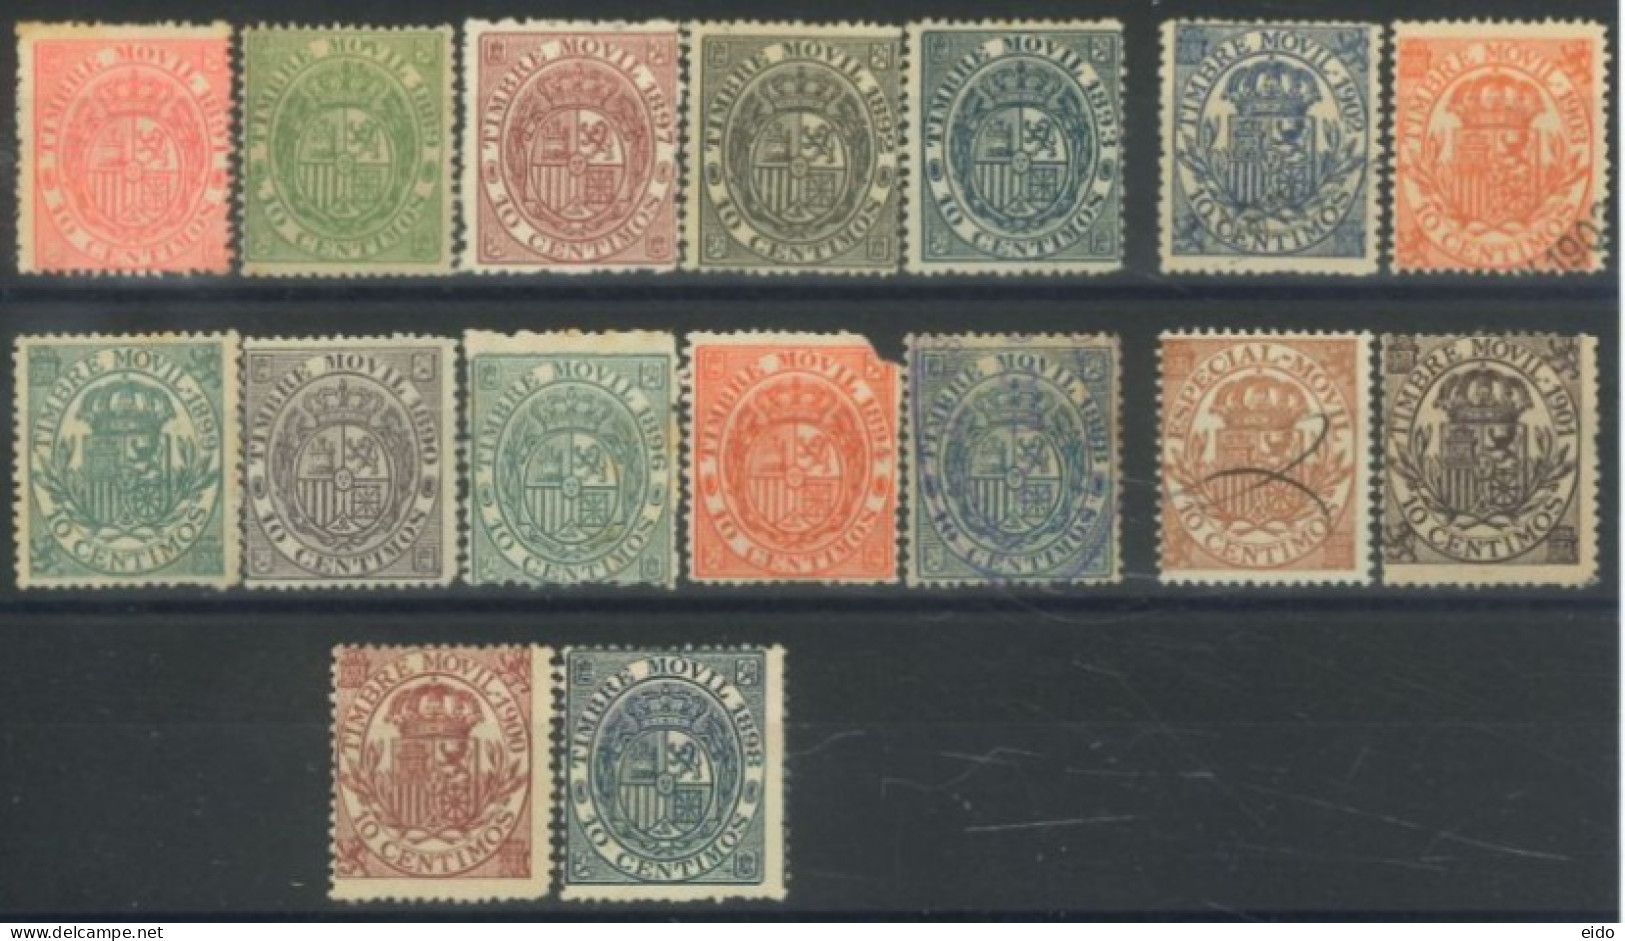 SPAIN, 1888/1903, REVENUE ADHESIVE STAMPS SET OF 16, MOSTLY MINT NO GUM (MNG), ONLY 3 STAMPS USED. - Unused Stamps